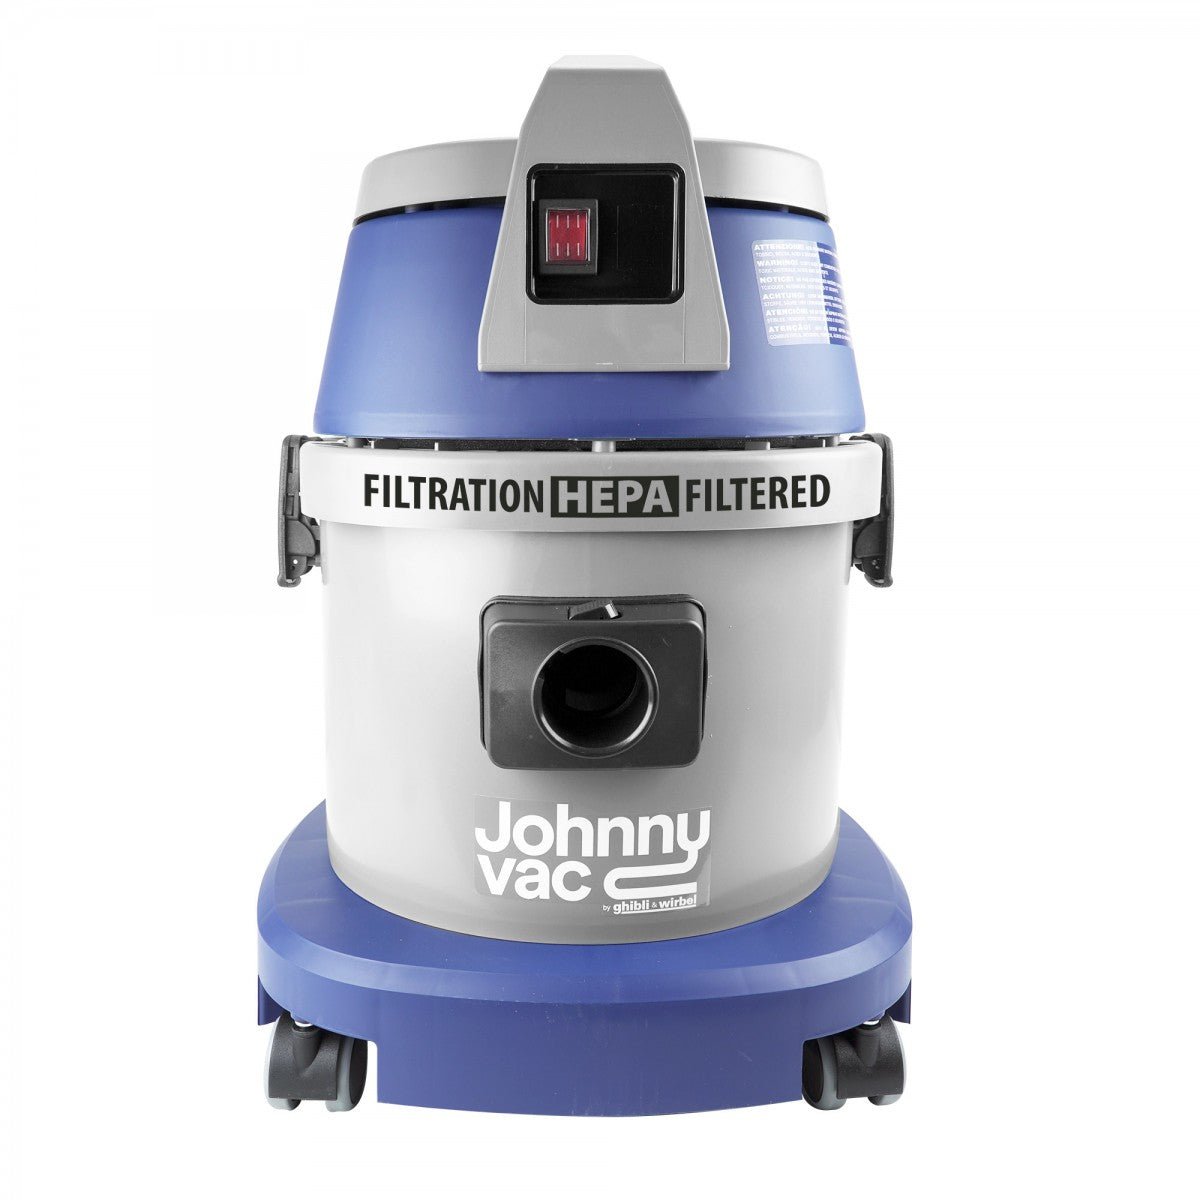 Johnny Vac / Ghibli JV10H HEPA Certified Canister Commercial Vacuum - Vacuums